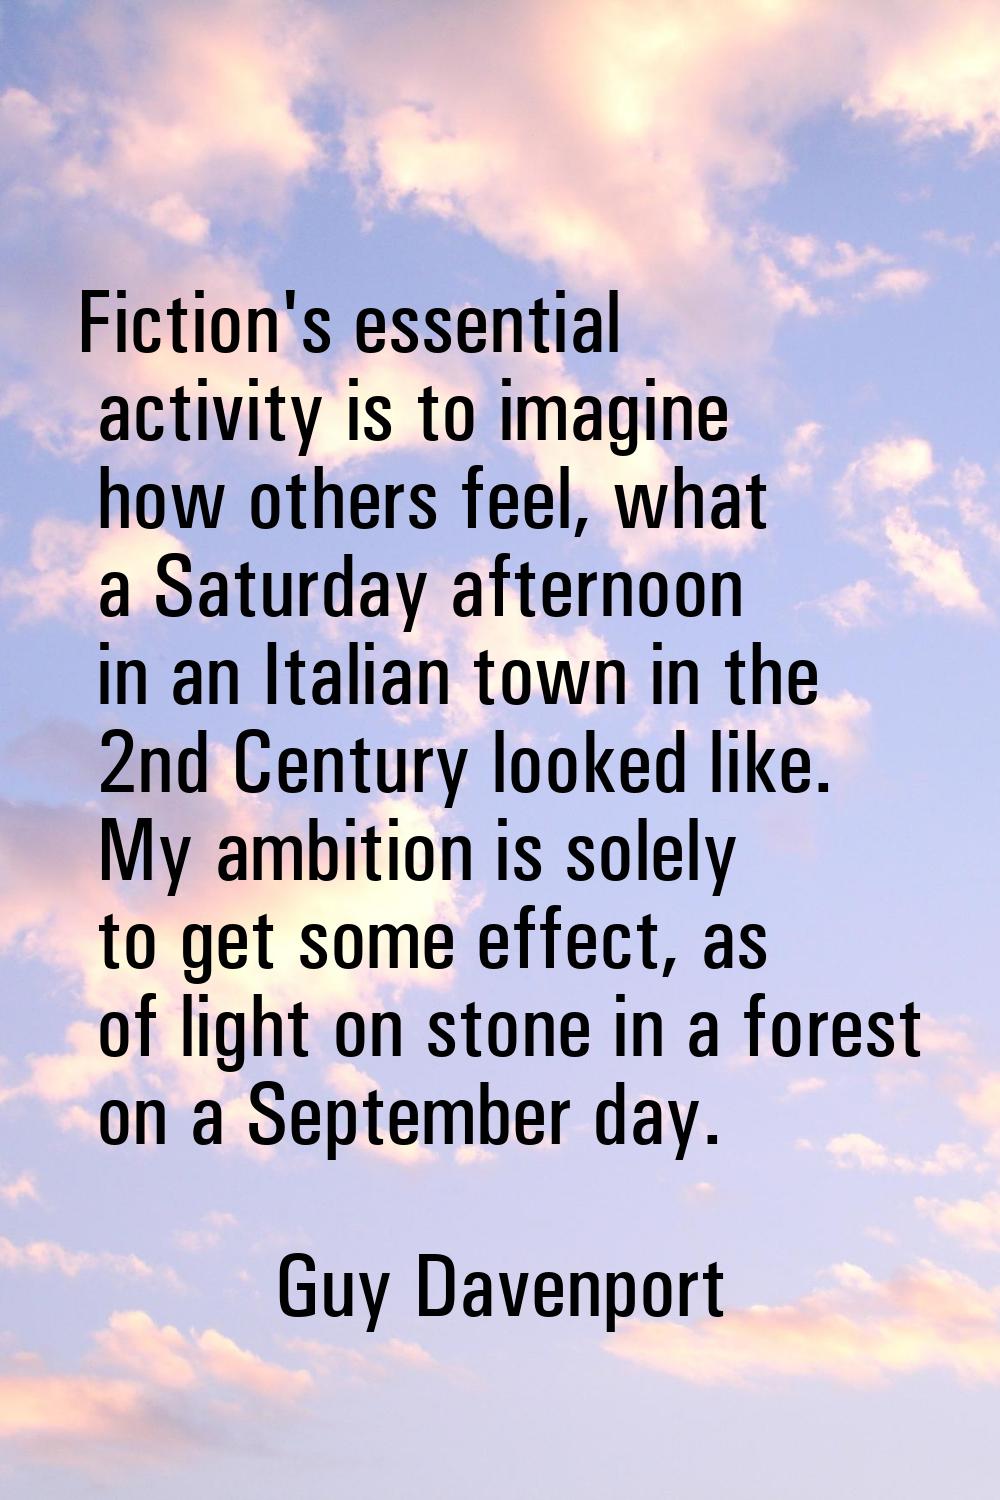 Fiction's essential activity is to imagine how others feel, what a Saturday afternoon in an Italian